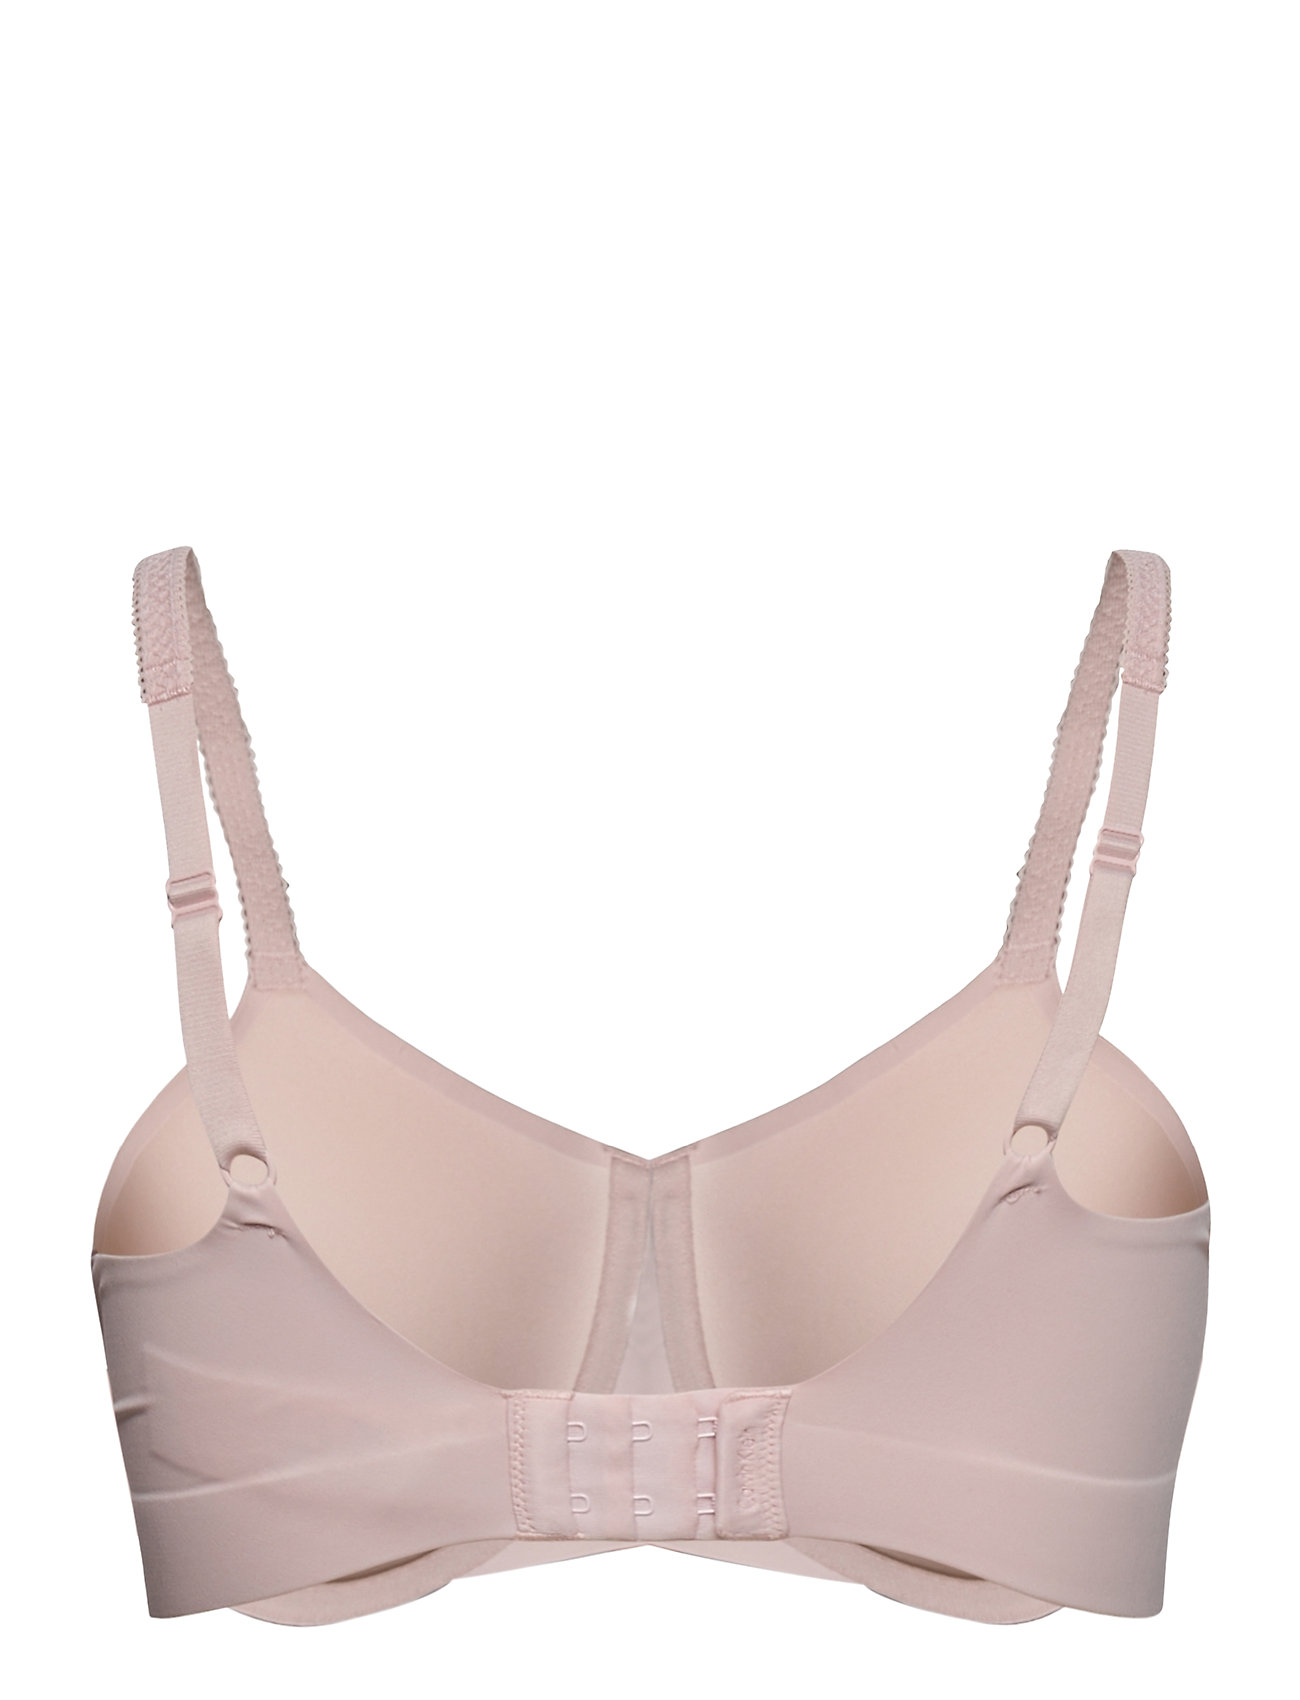 Calvin Klein - LIGHTLY LINED PC - full cup bras - nymphs thigh - 1